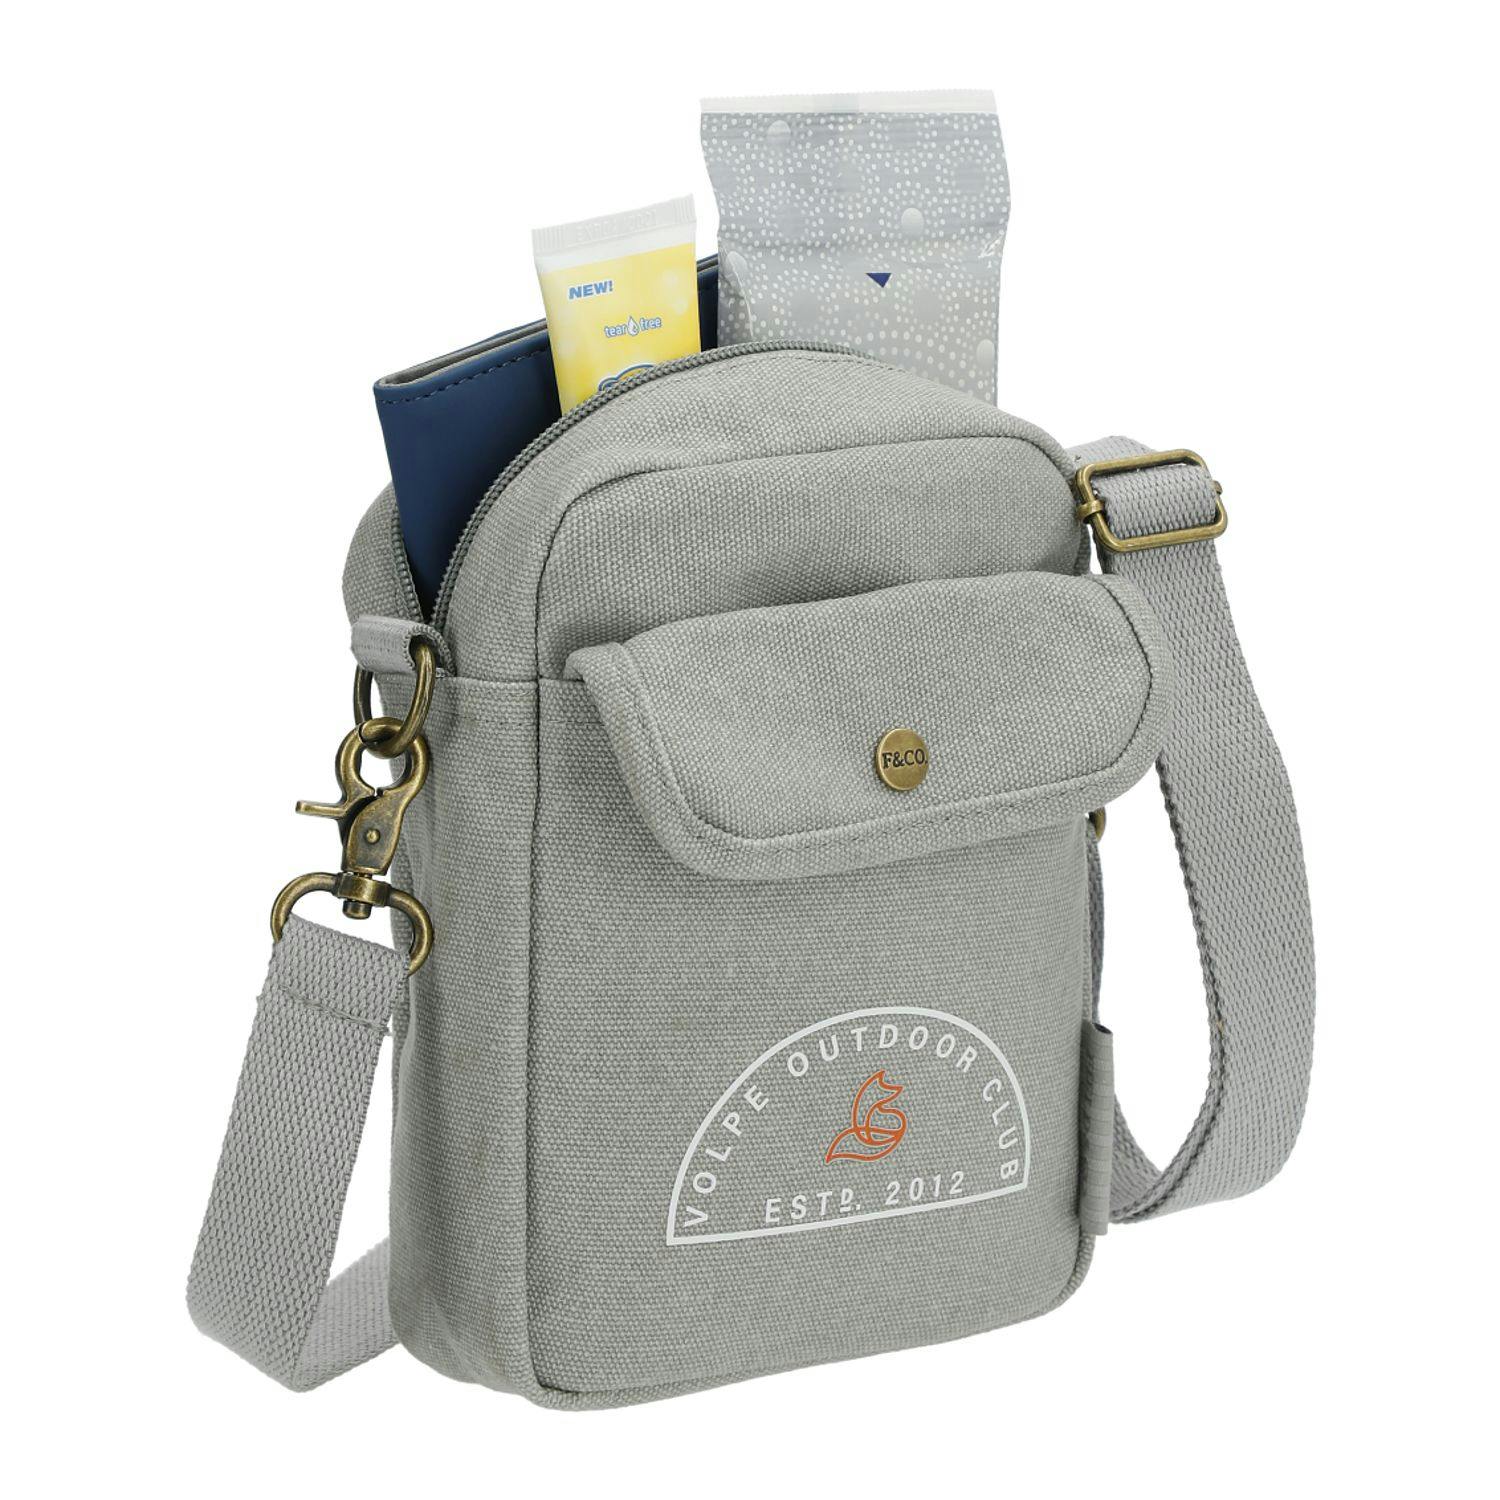 Field & Co Campus Cotton Crossbody Tote - additional Image 2